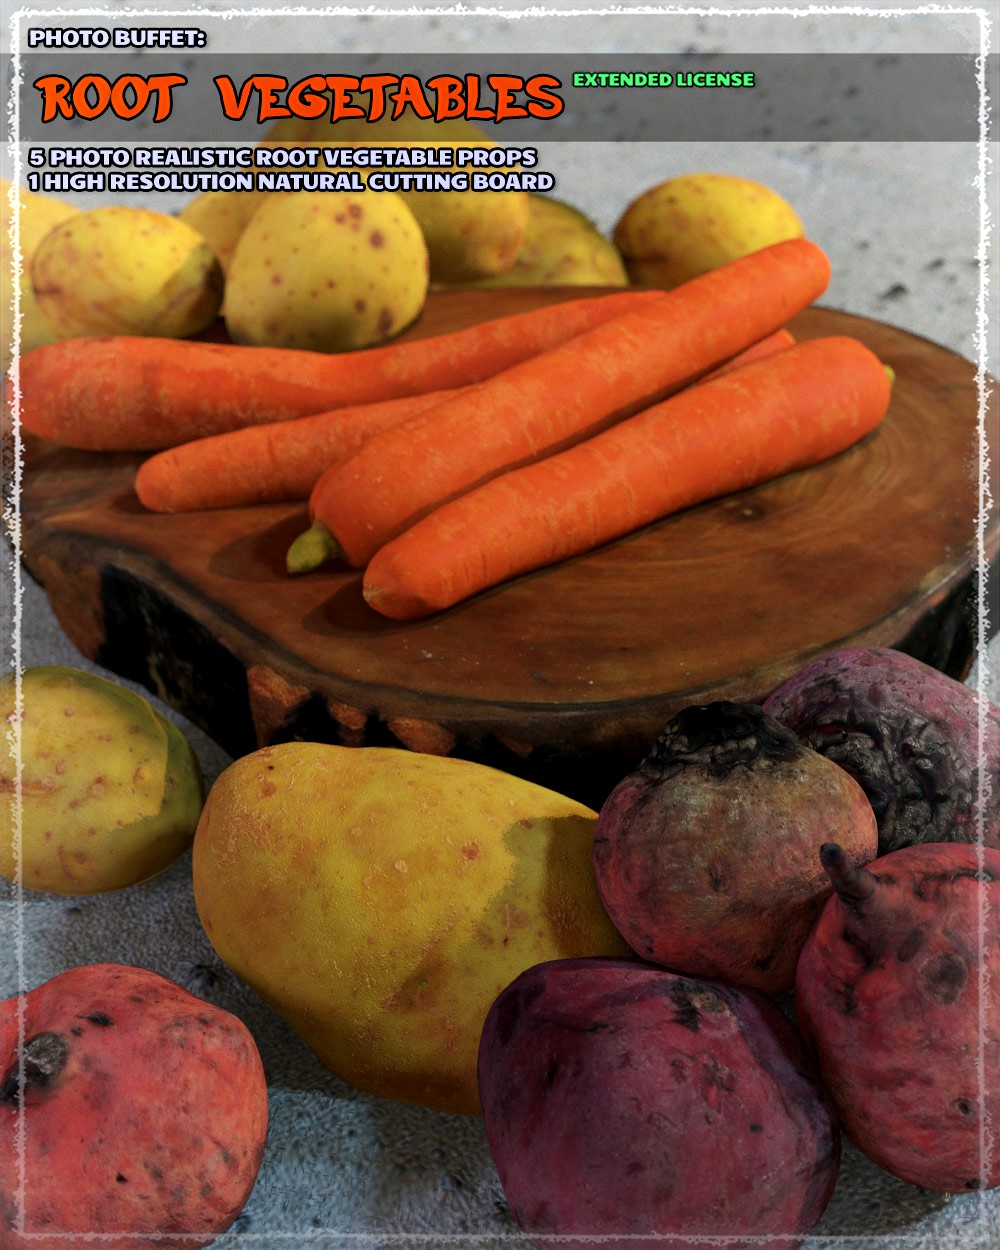 Photo Buffet: Root Vegetables - Extended License